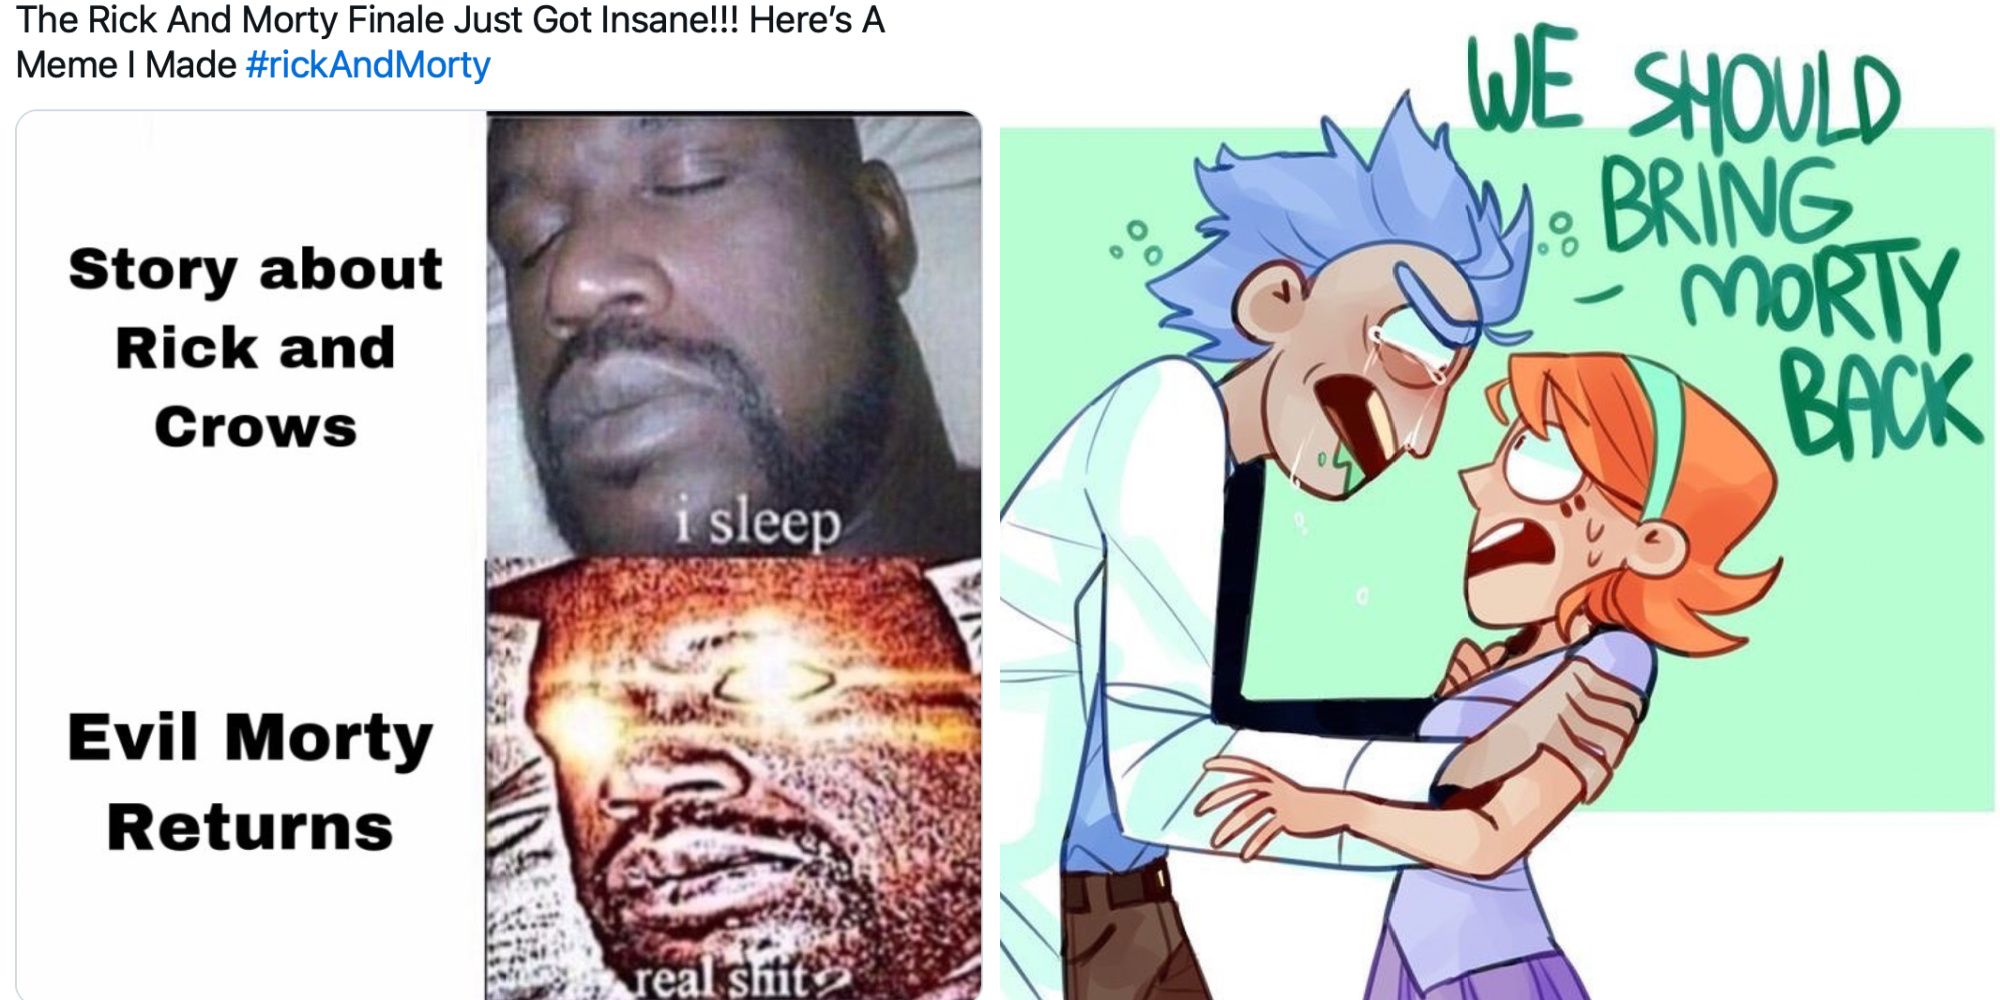 A split image of two Rick and Morty memes.